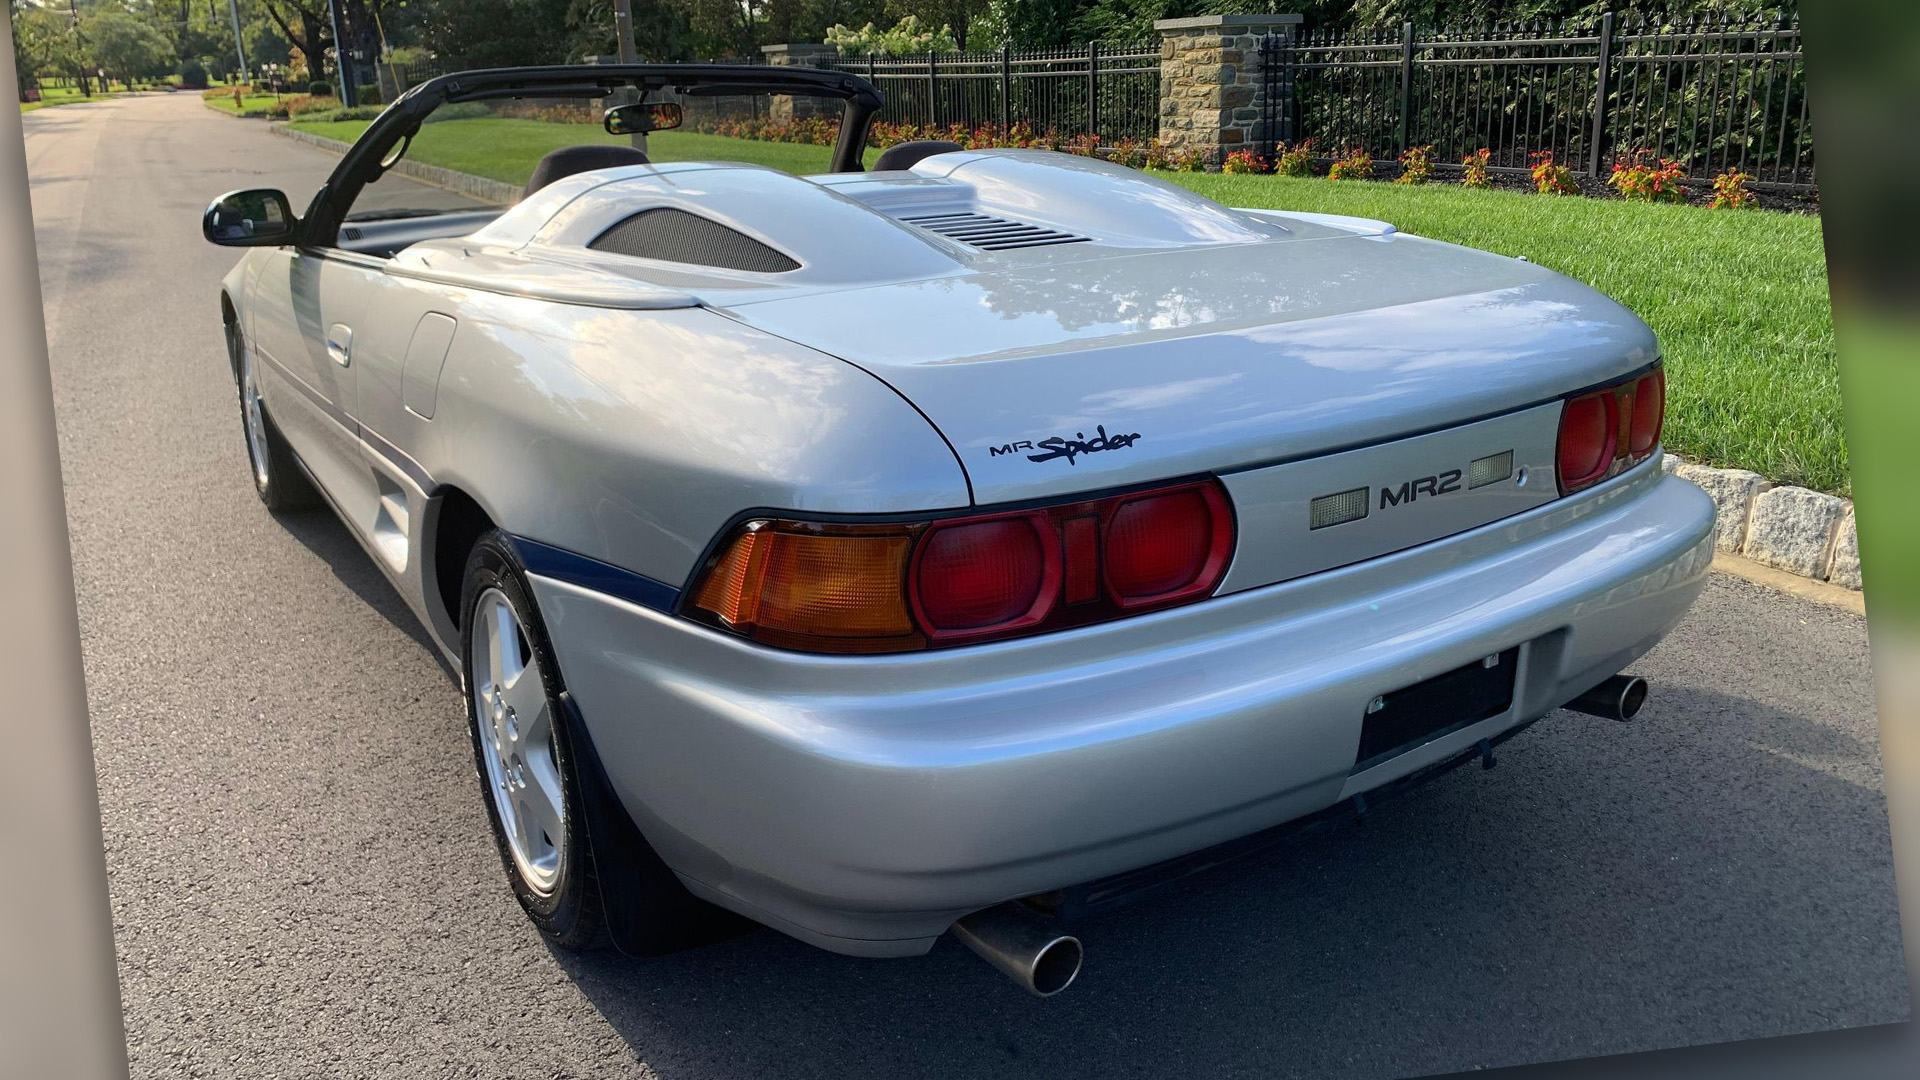 1996 Toyota MR2 Spider, viewed from the rear three-quarter angle